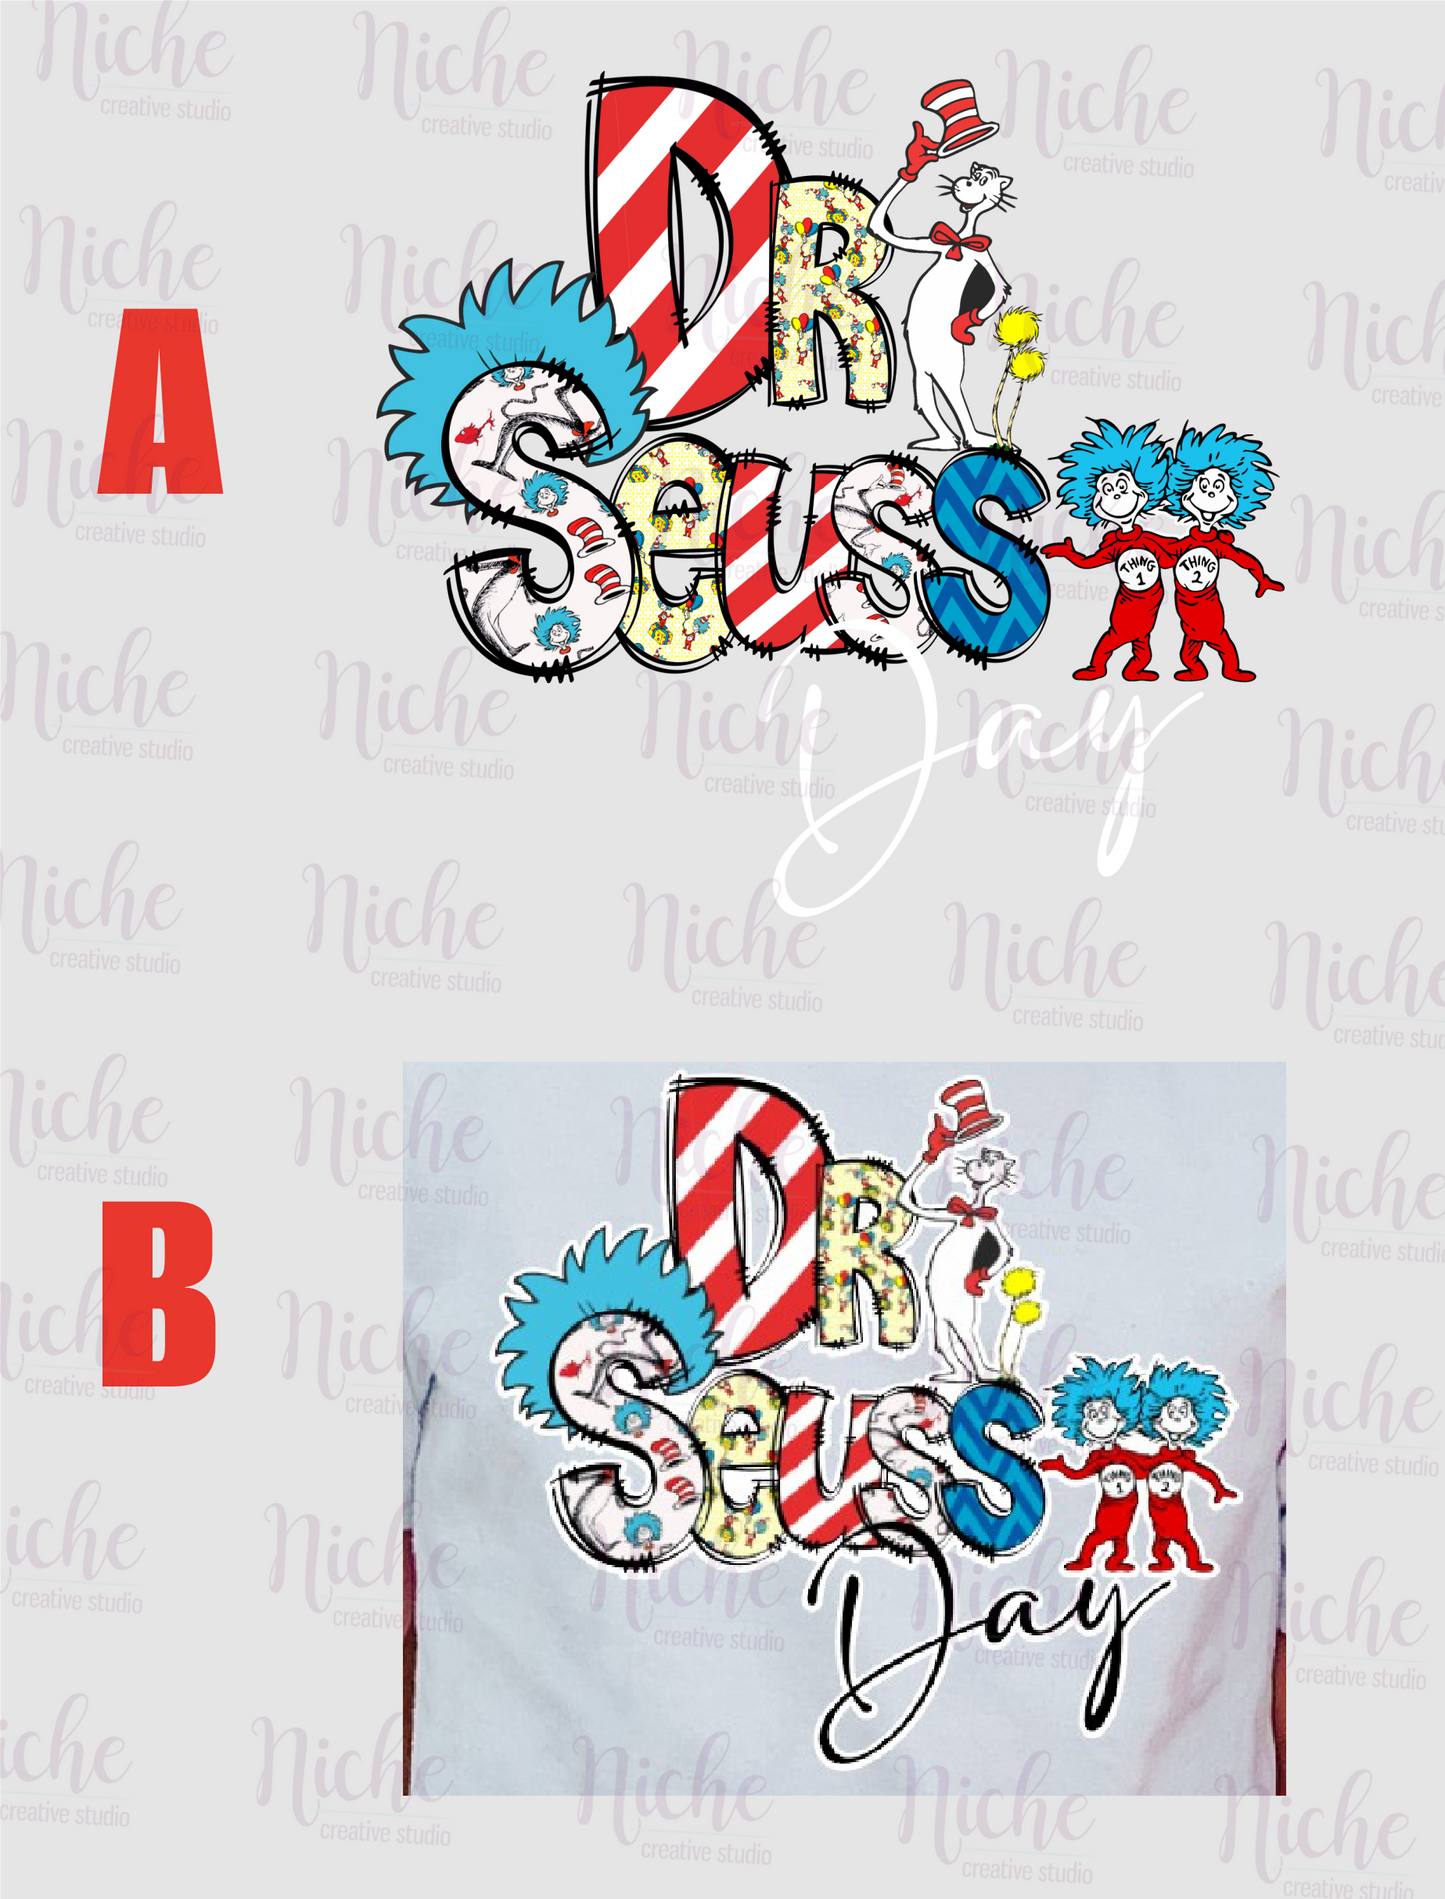 -DRS1340 Dr Seuss Day Decal